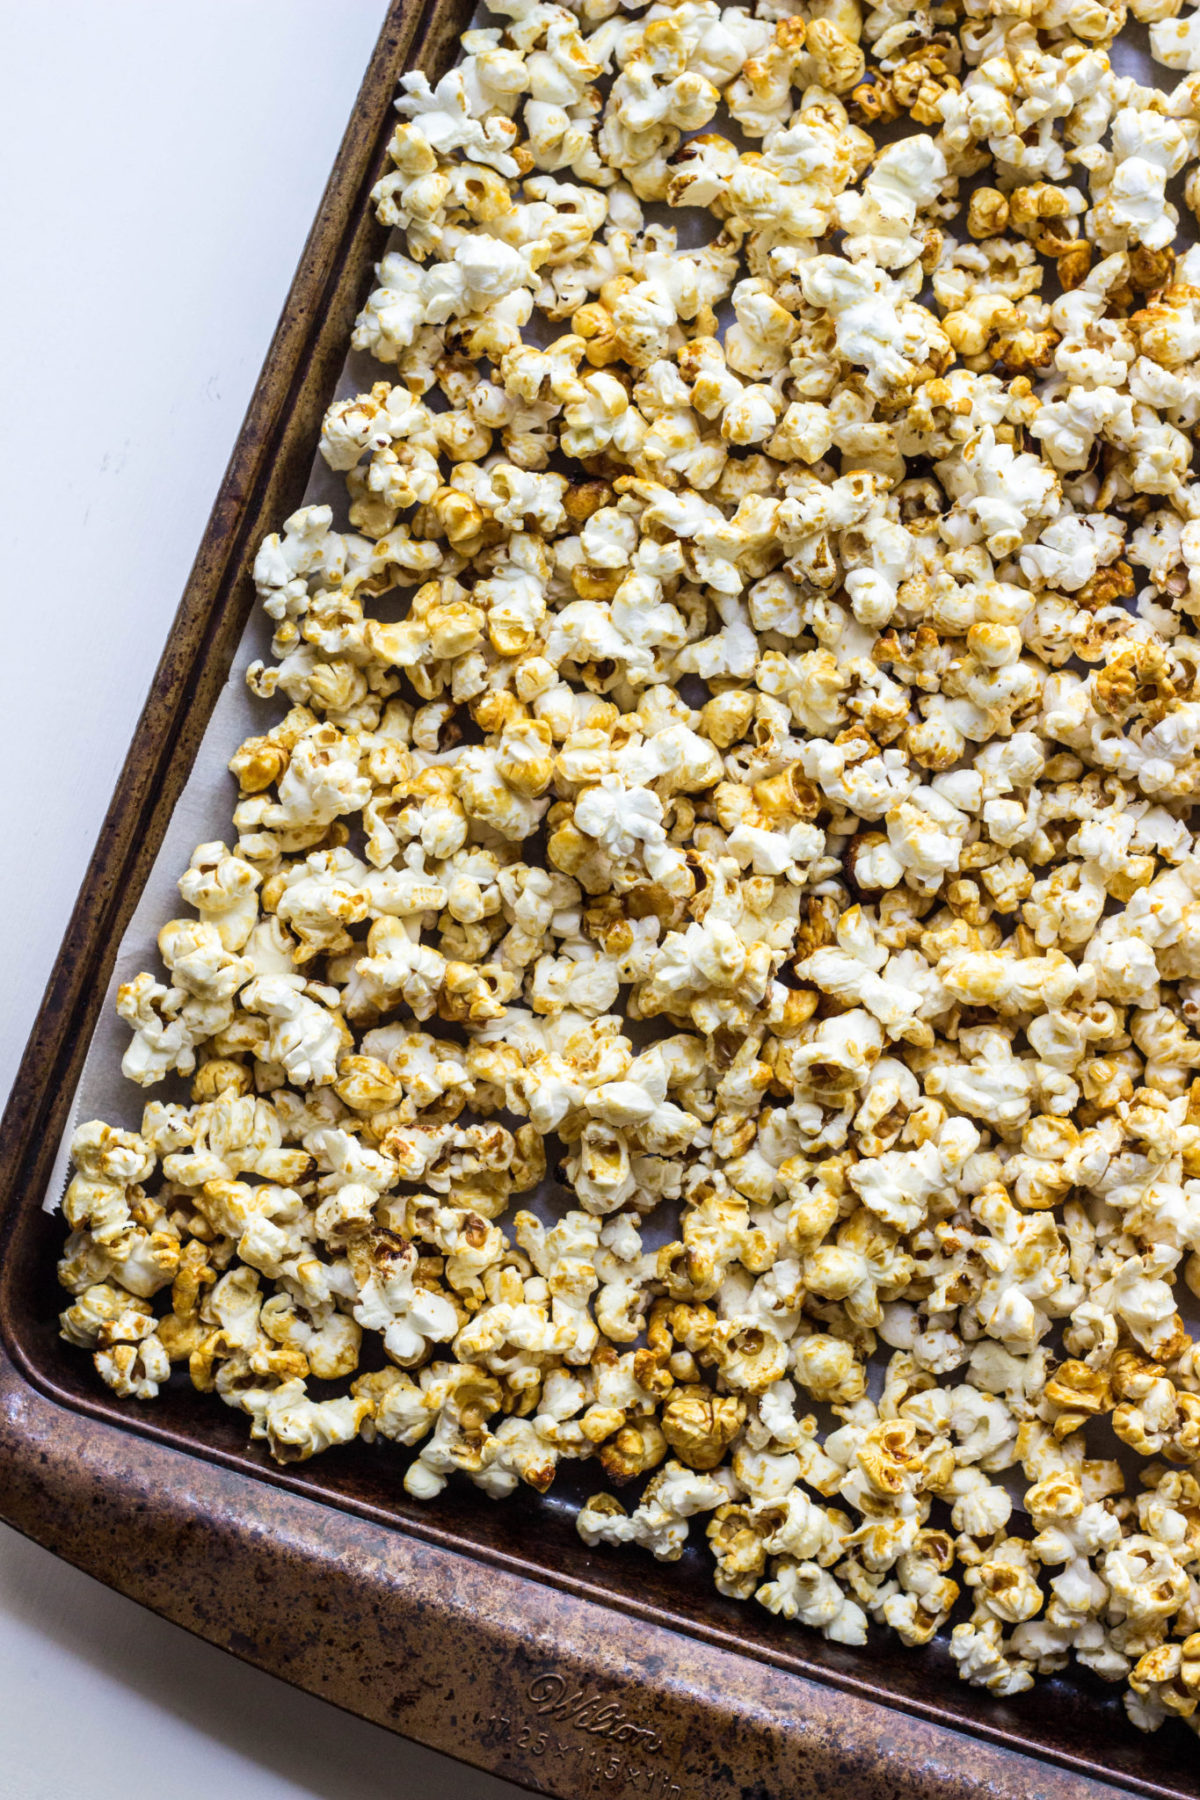 Top view of Vegan maple kettle corn on a baking sheet lined with parchment paper.